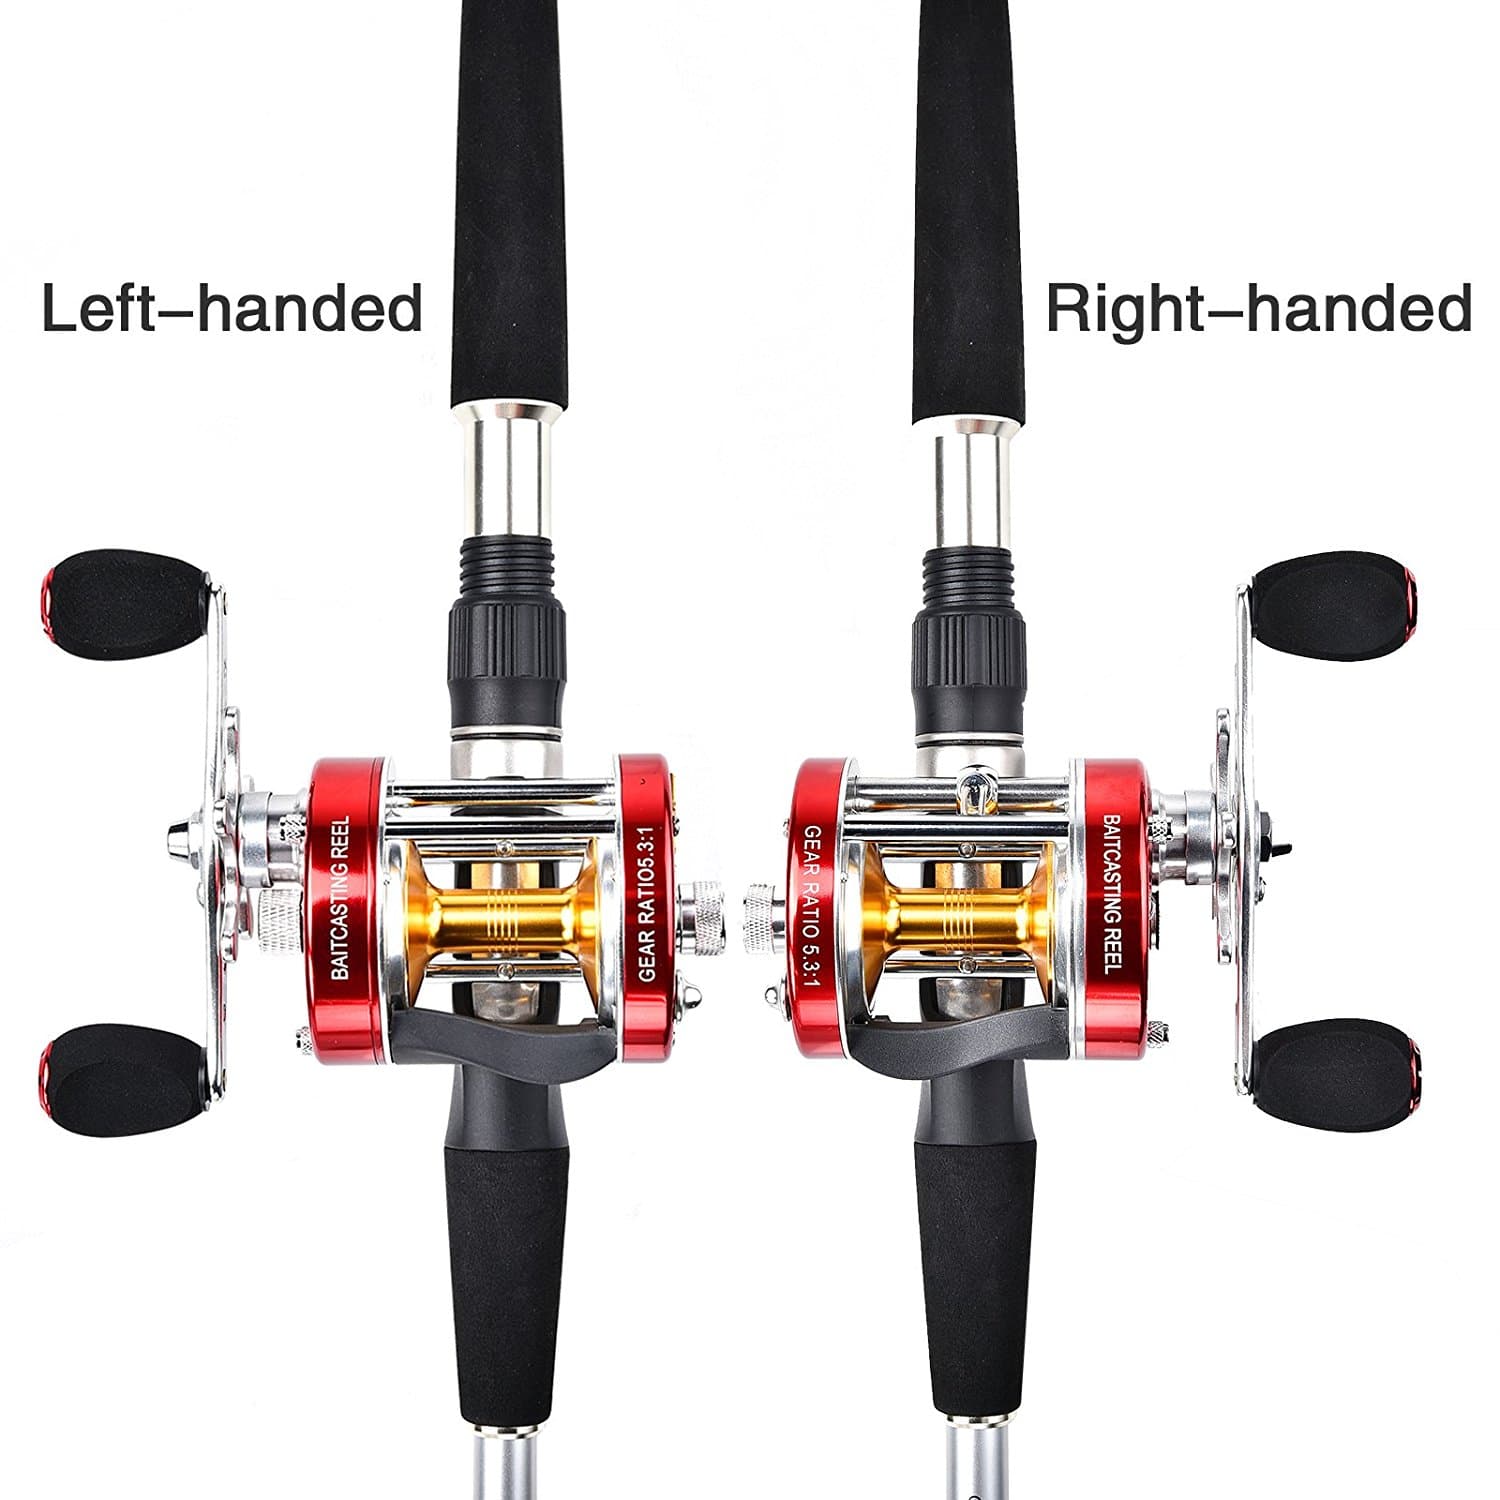 KASTKING ROVER RXA ROUND BAITCASTING REEL INSHORE & OFFSHORE CONVENTIONAL REEL 